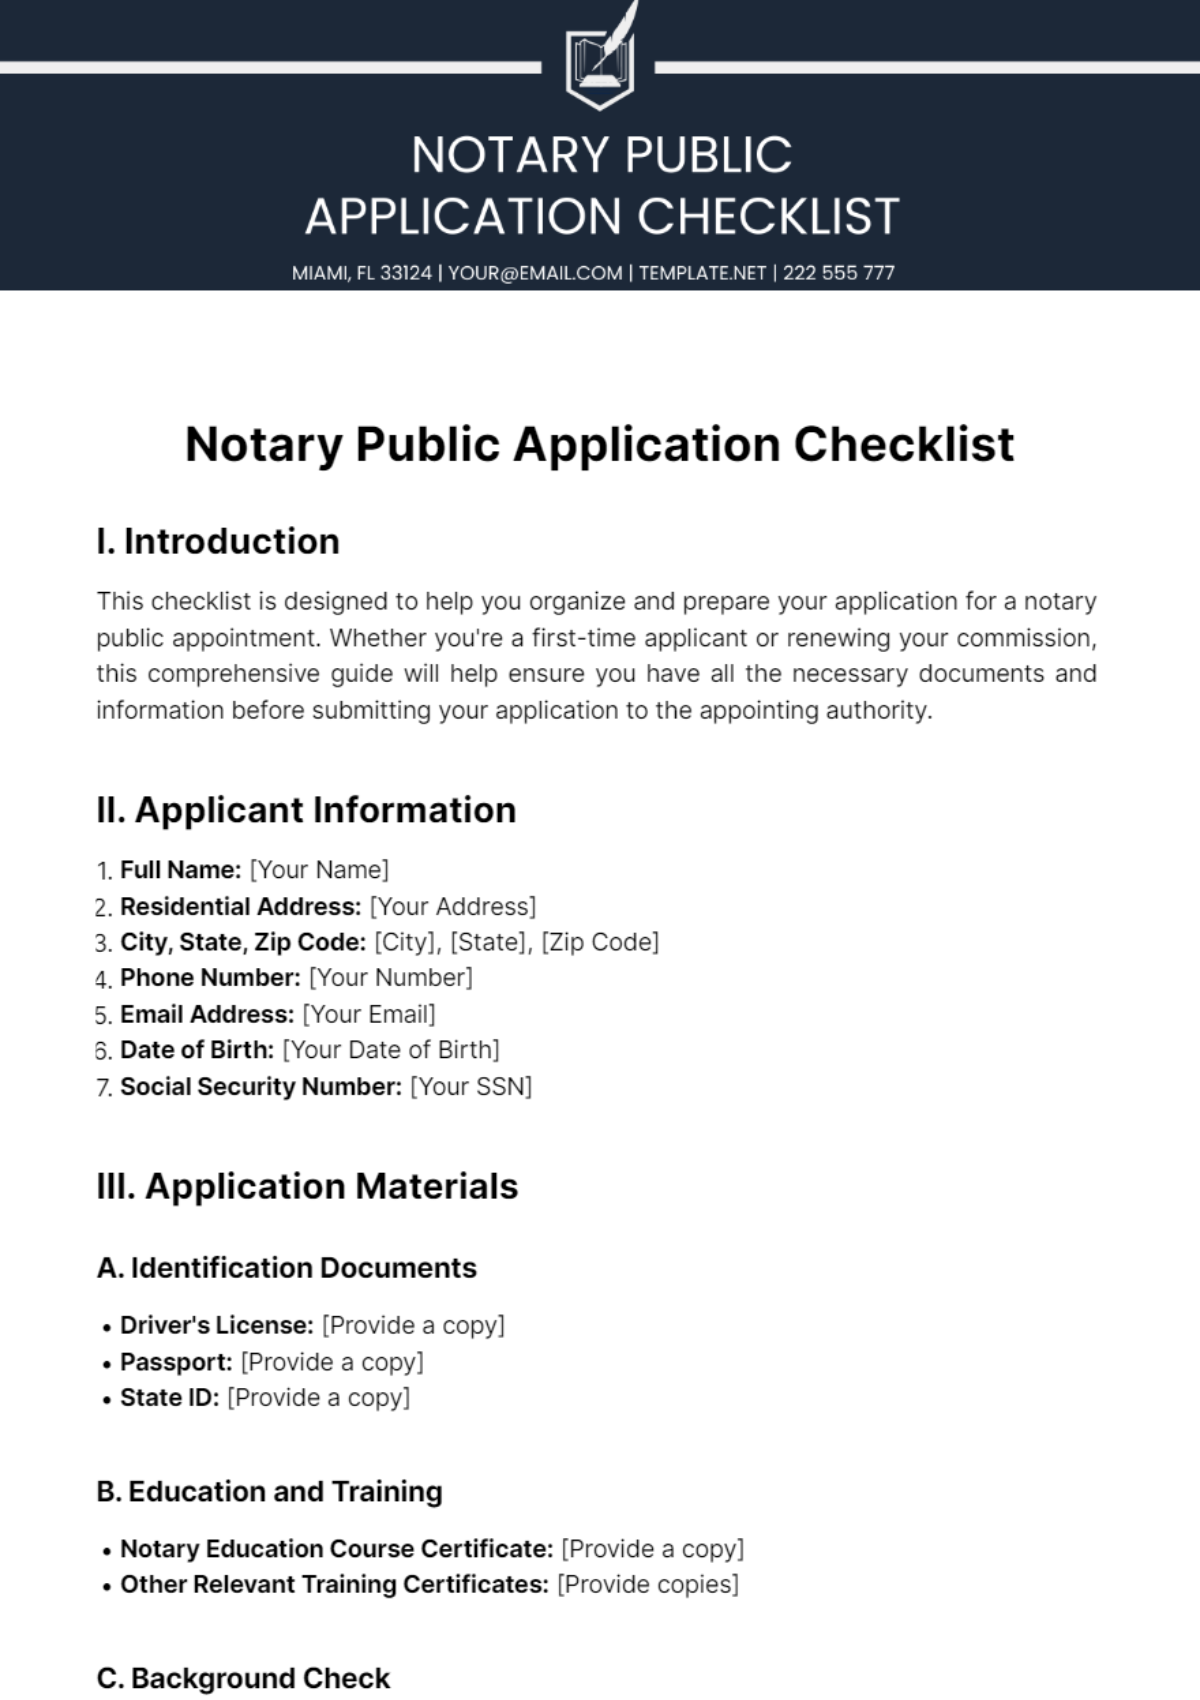 Notary Public Application Checklist Template